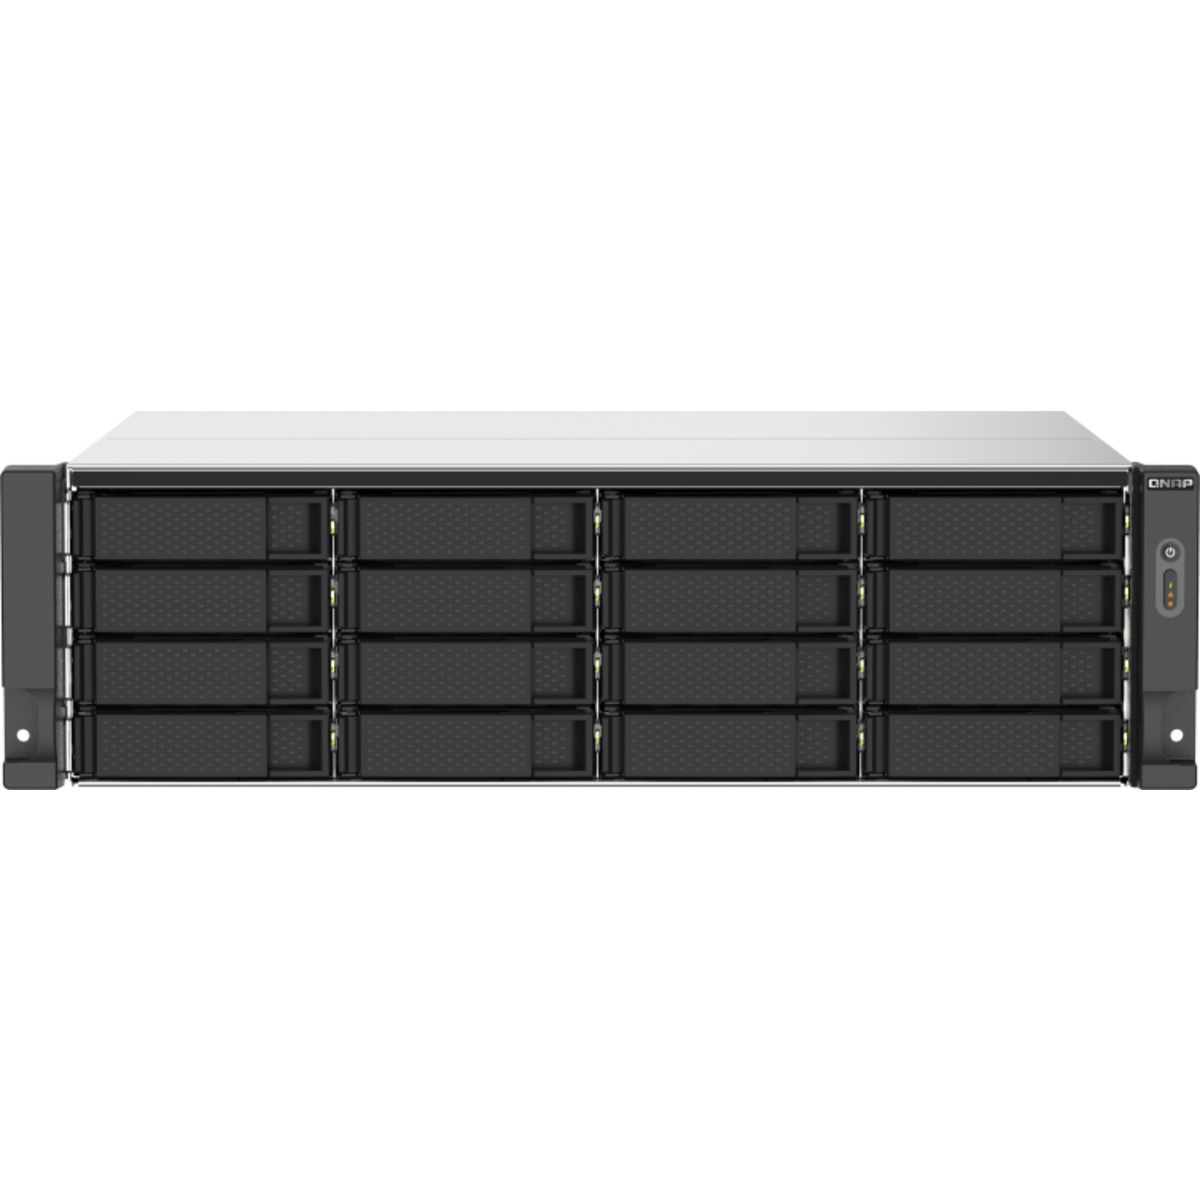 QNAP TS-1673AU-RP 11tb 16-Bay RackMount Multimedia / Power User / Business NAS - Network Attached Storage Device 11x1tb Western Digital Red SA500 WDS100T1R0A 2.5 560/530MB/s SATA 6Gb/s SSD NAS Class Drives Installed - Burn-In Tested - FREE RAM UPGRADE TS-1673AU-RP